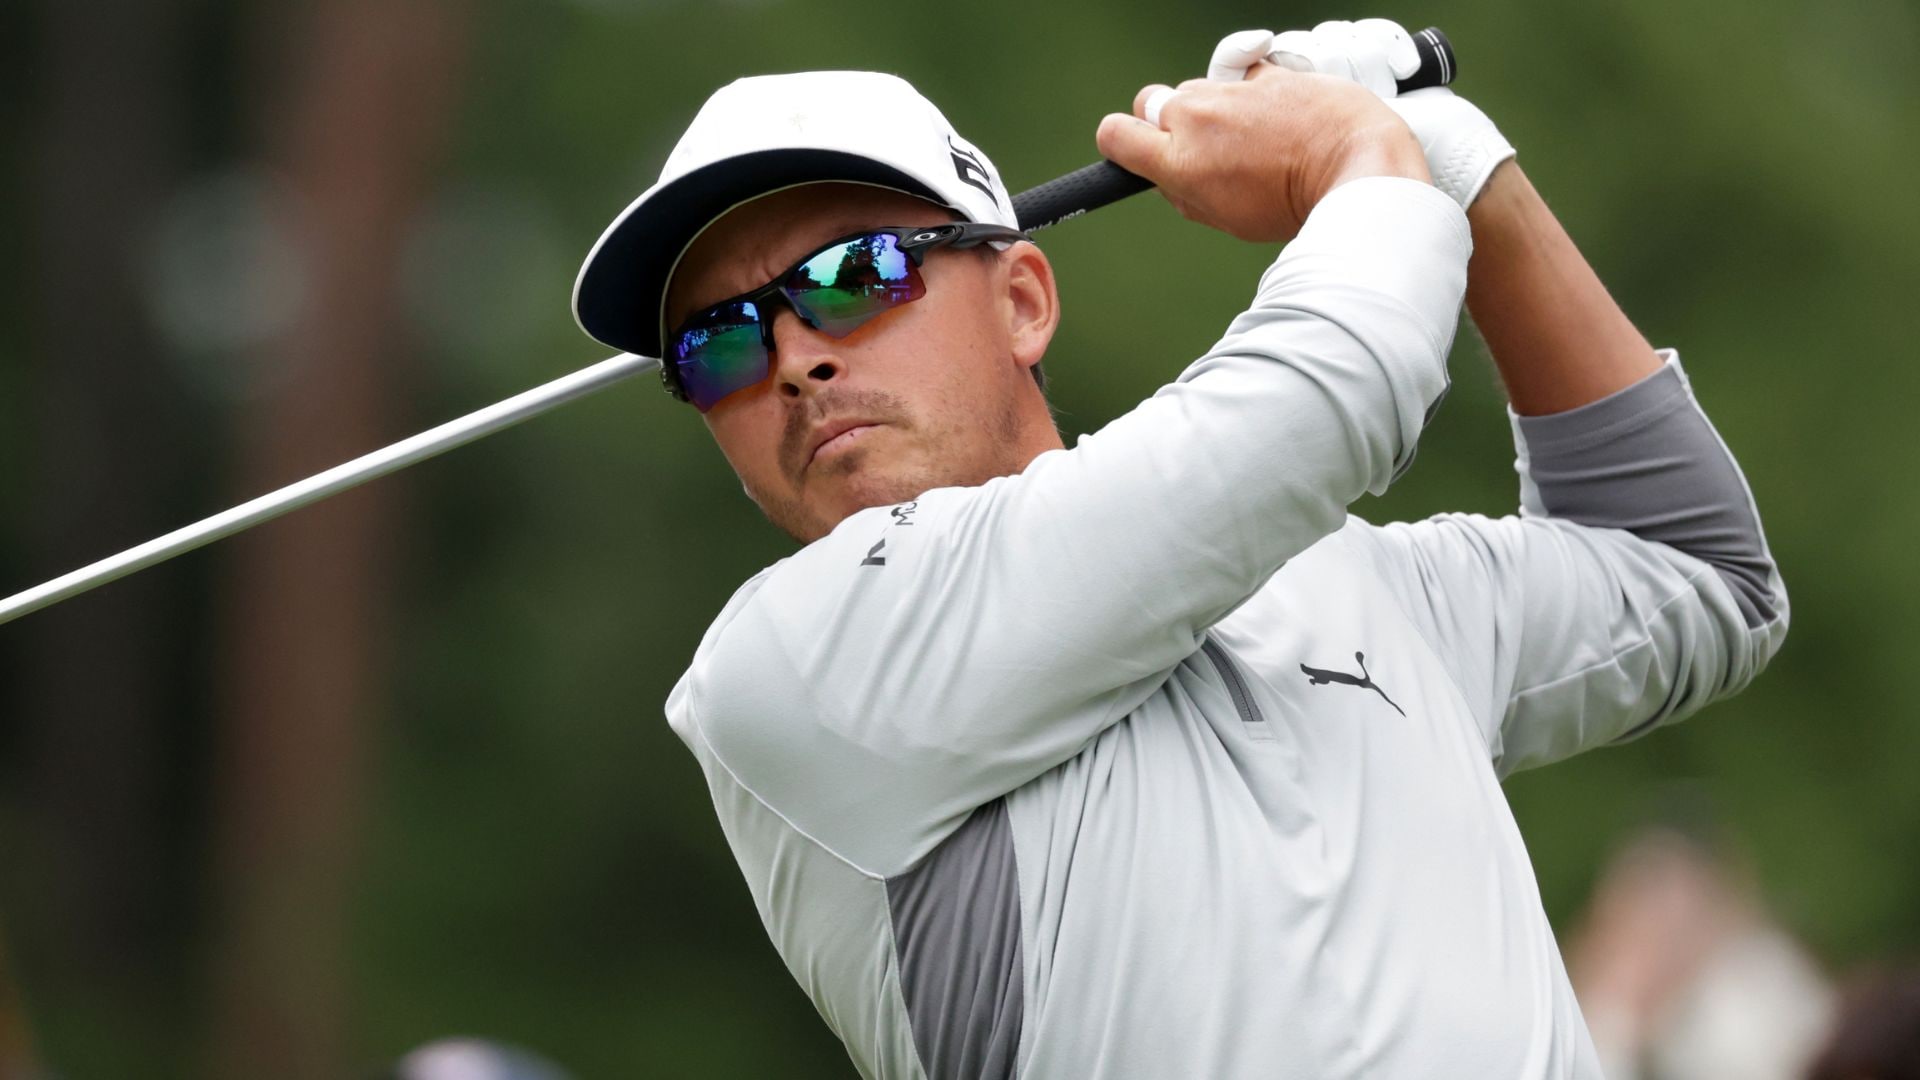 Rickie Fowler (T-6) happy with recent personnel changes and for Joe Skovron